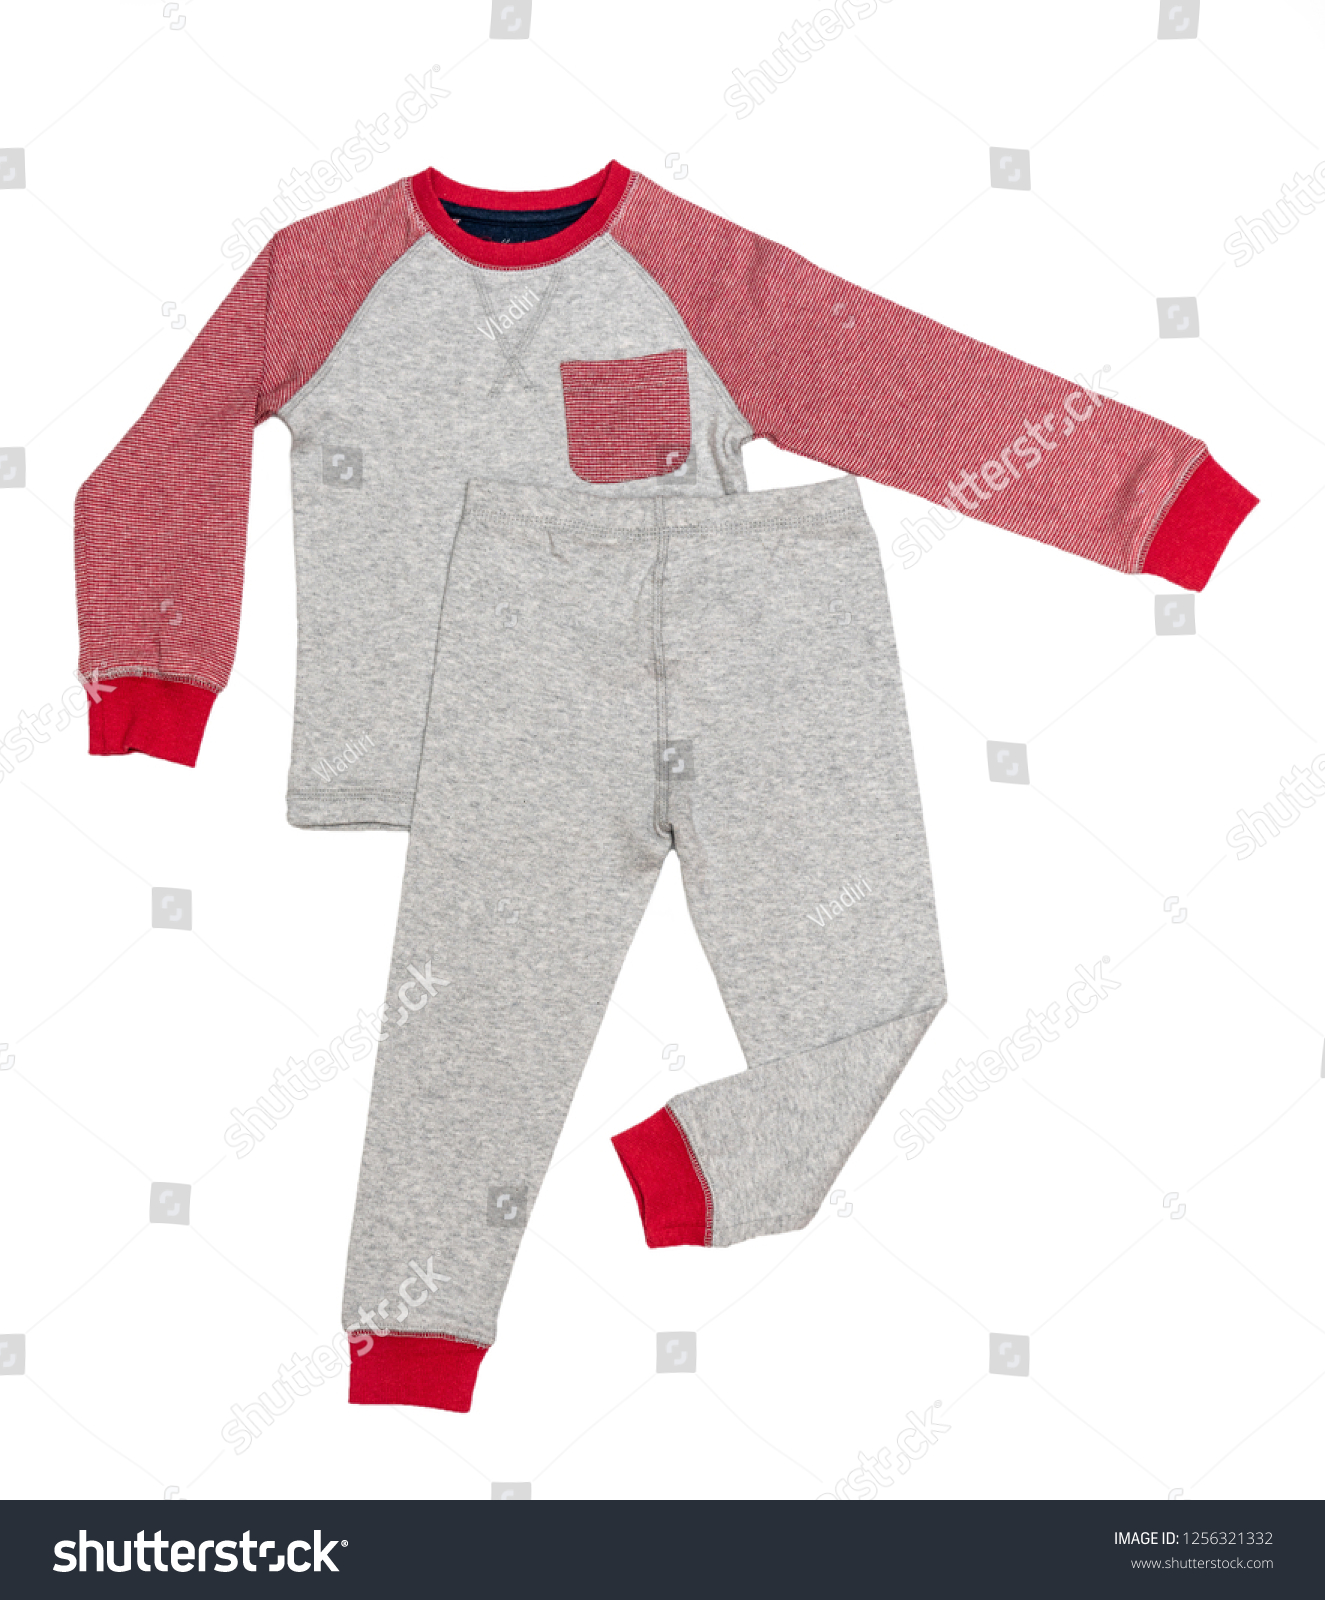 Sleepwear set on white background. Shirt and pants made of gray/red/blue cotton fabric. Pajama for boy. Flat lay. Top view.  #1256321332